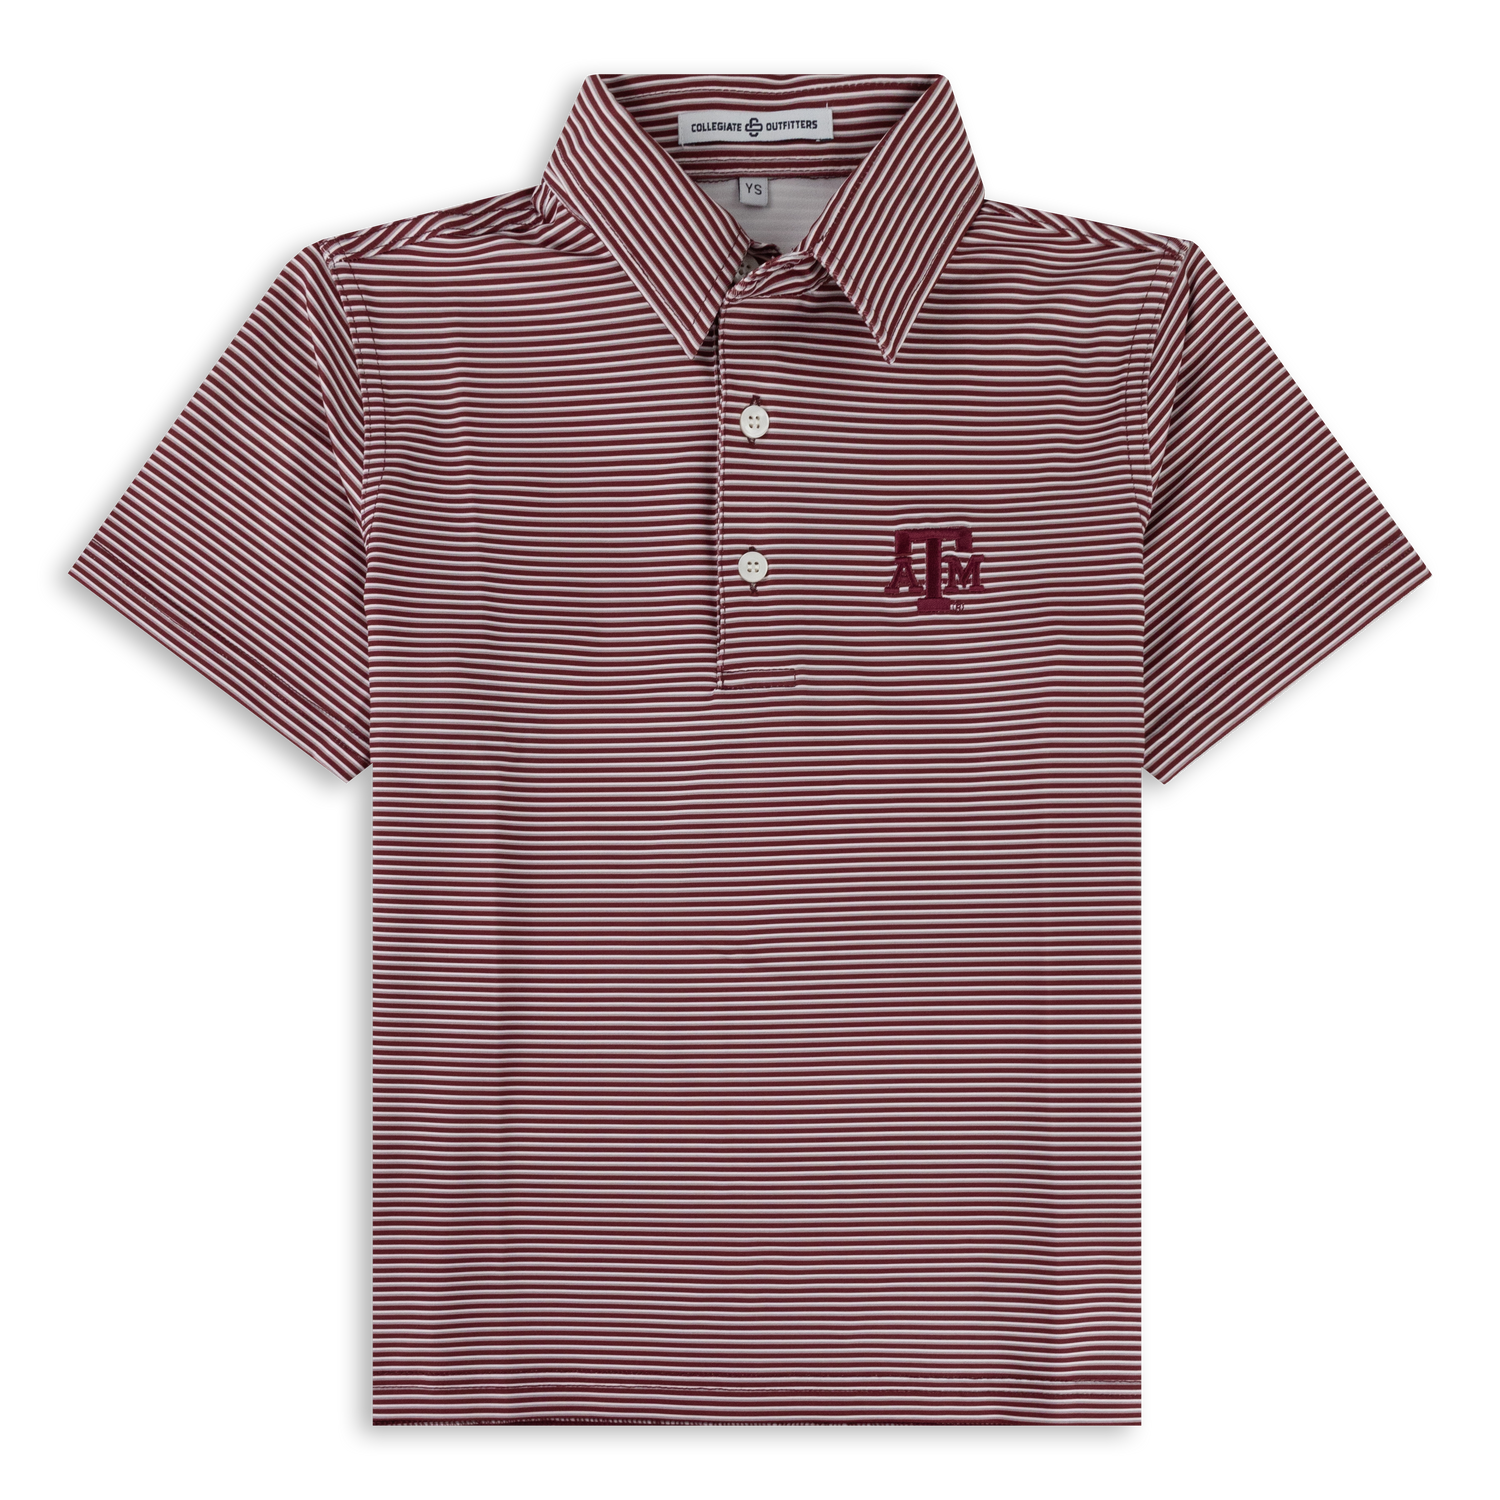 Texas A&M Youth Maroon Striped Polo